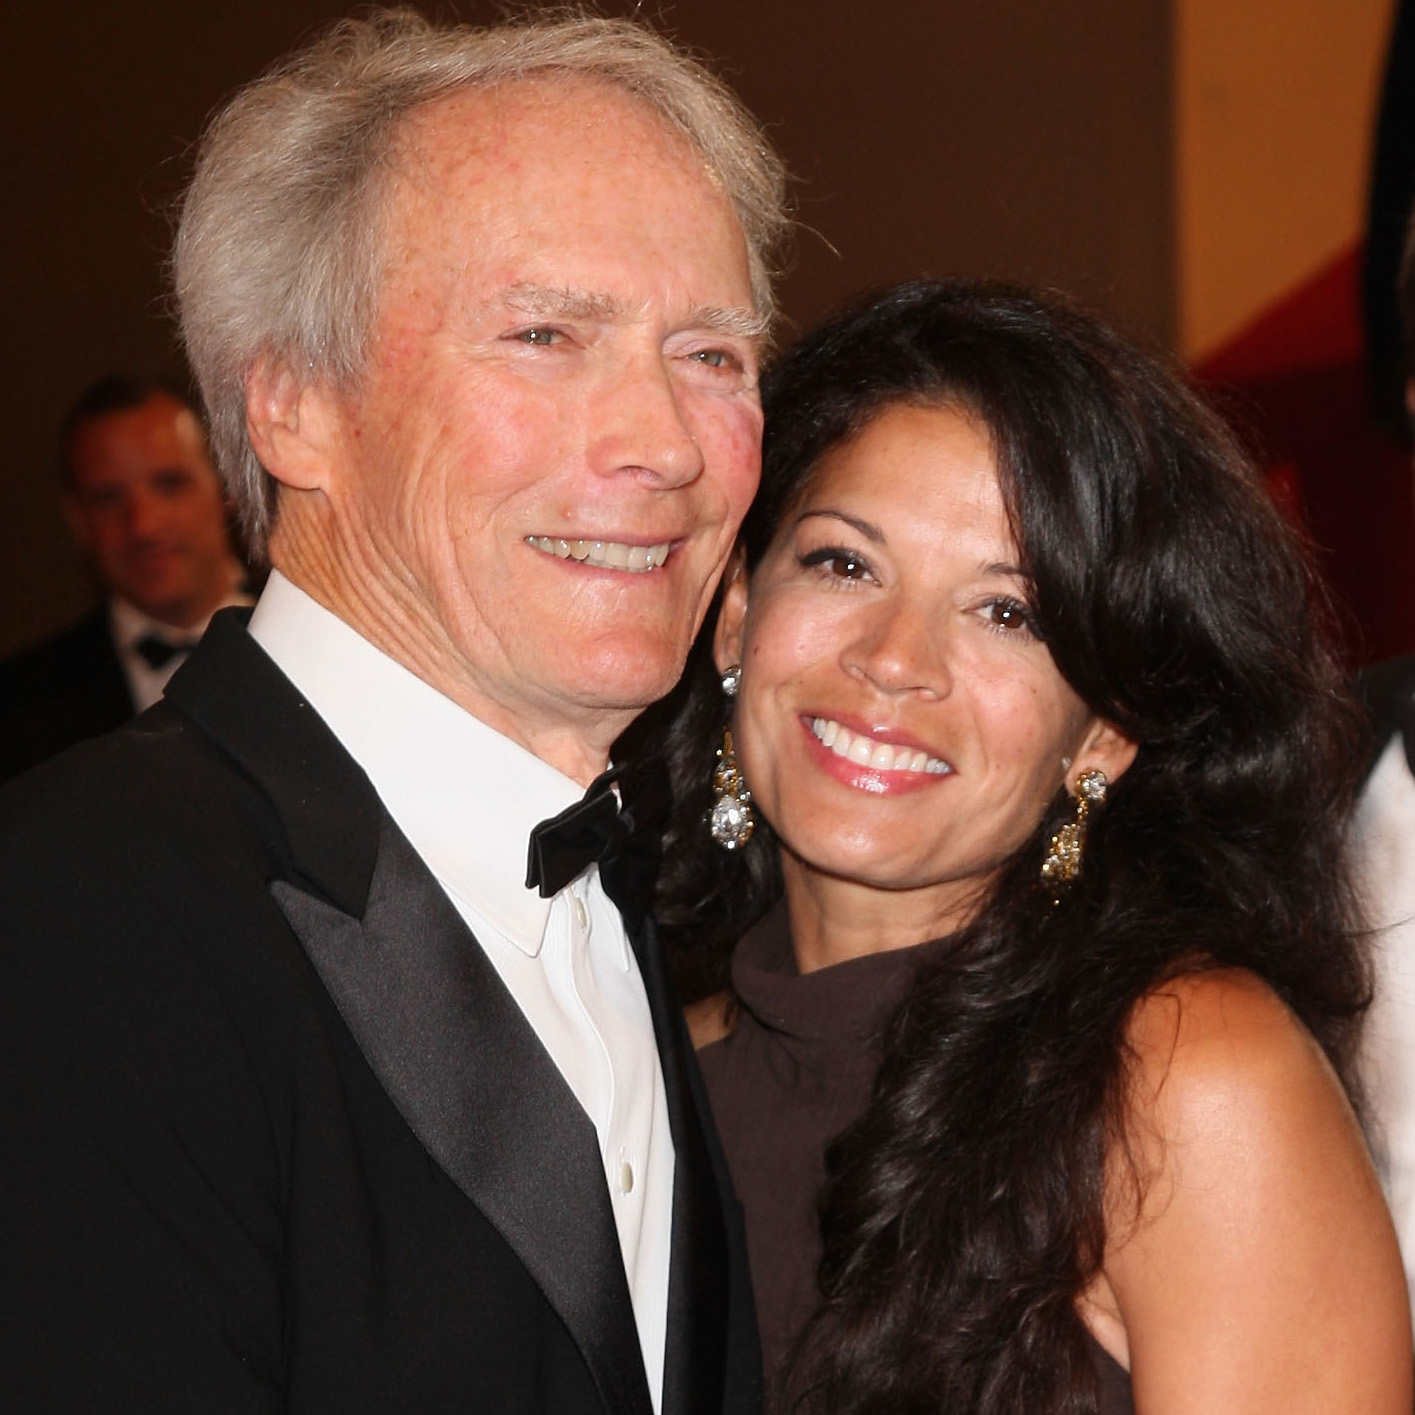 Clint Eastwood's ExWife Dina Eastwood Remarries 2 Years After Their